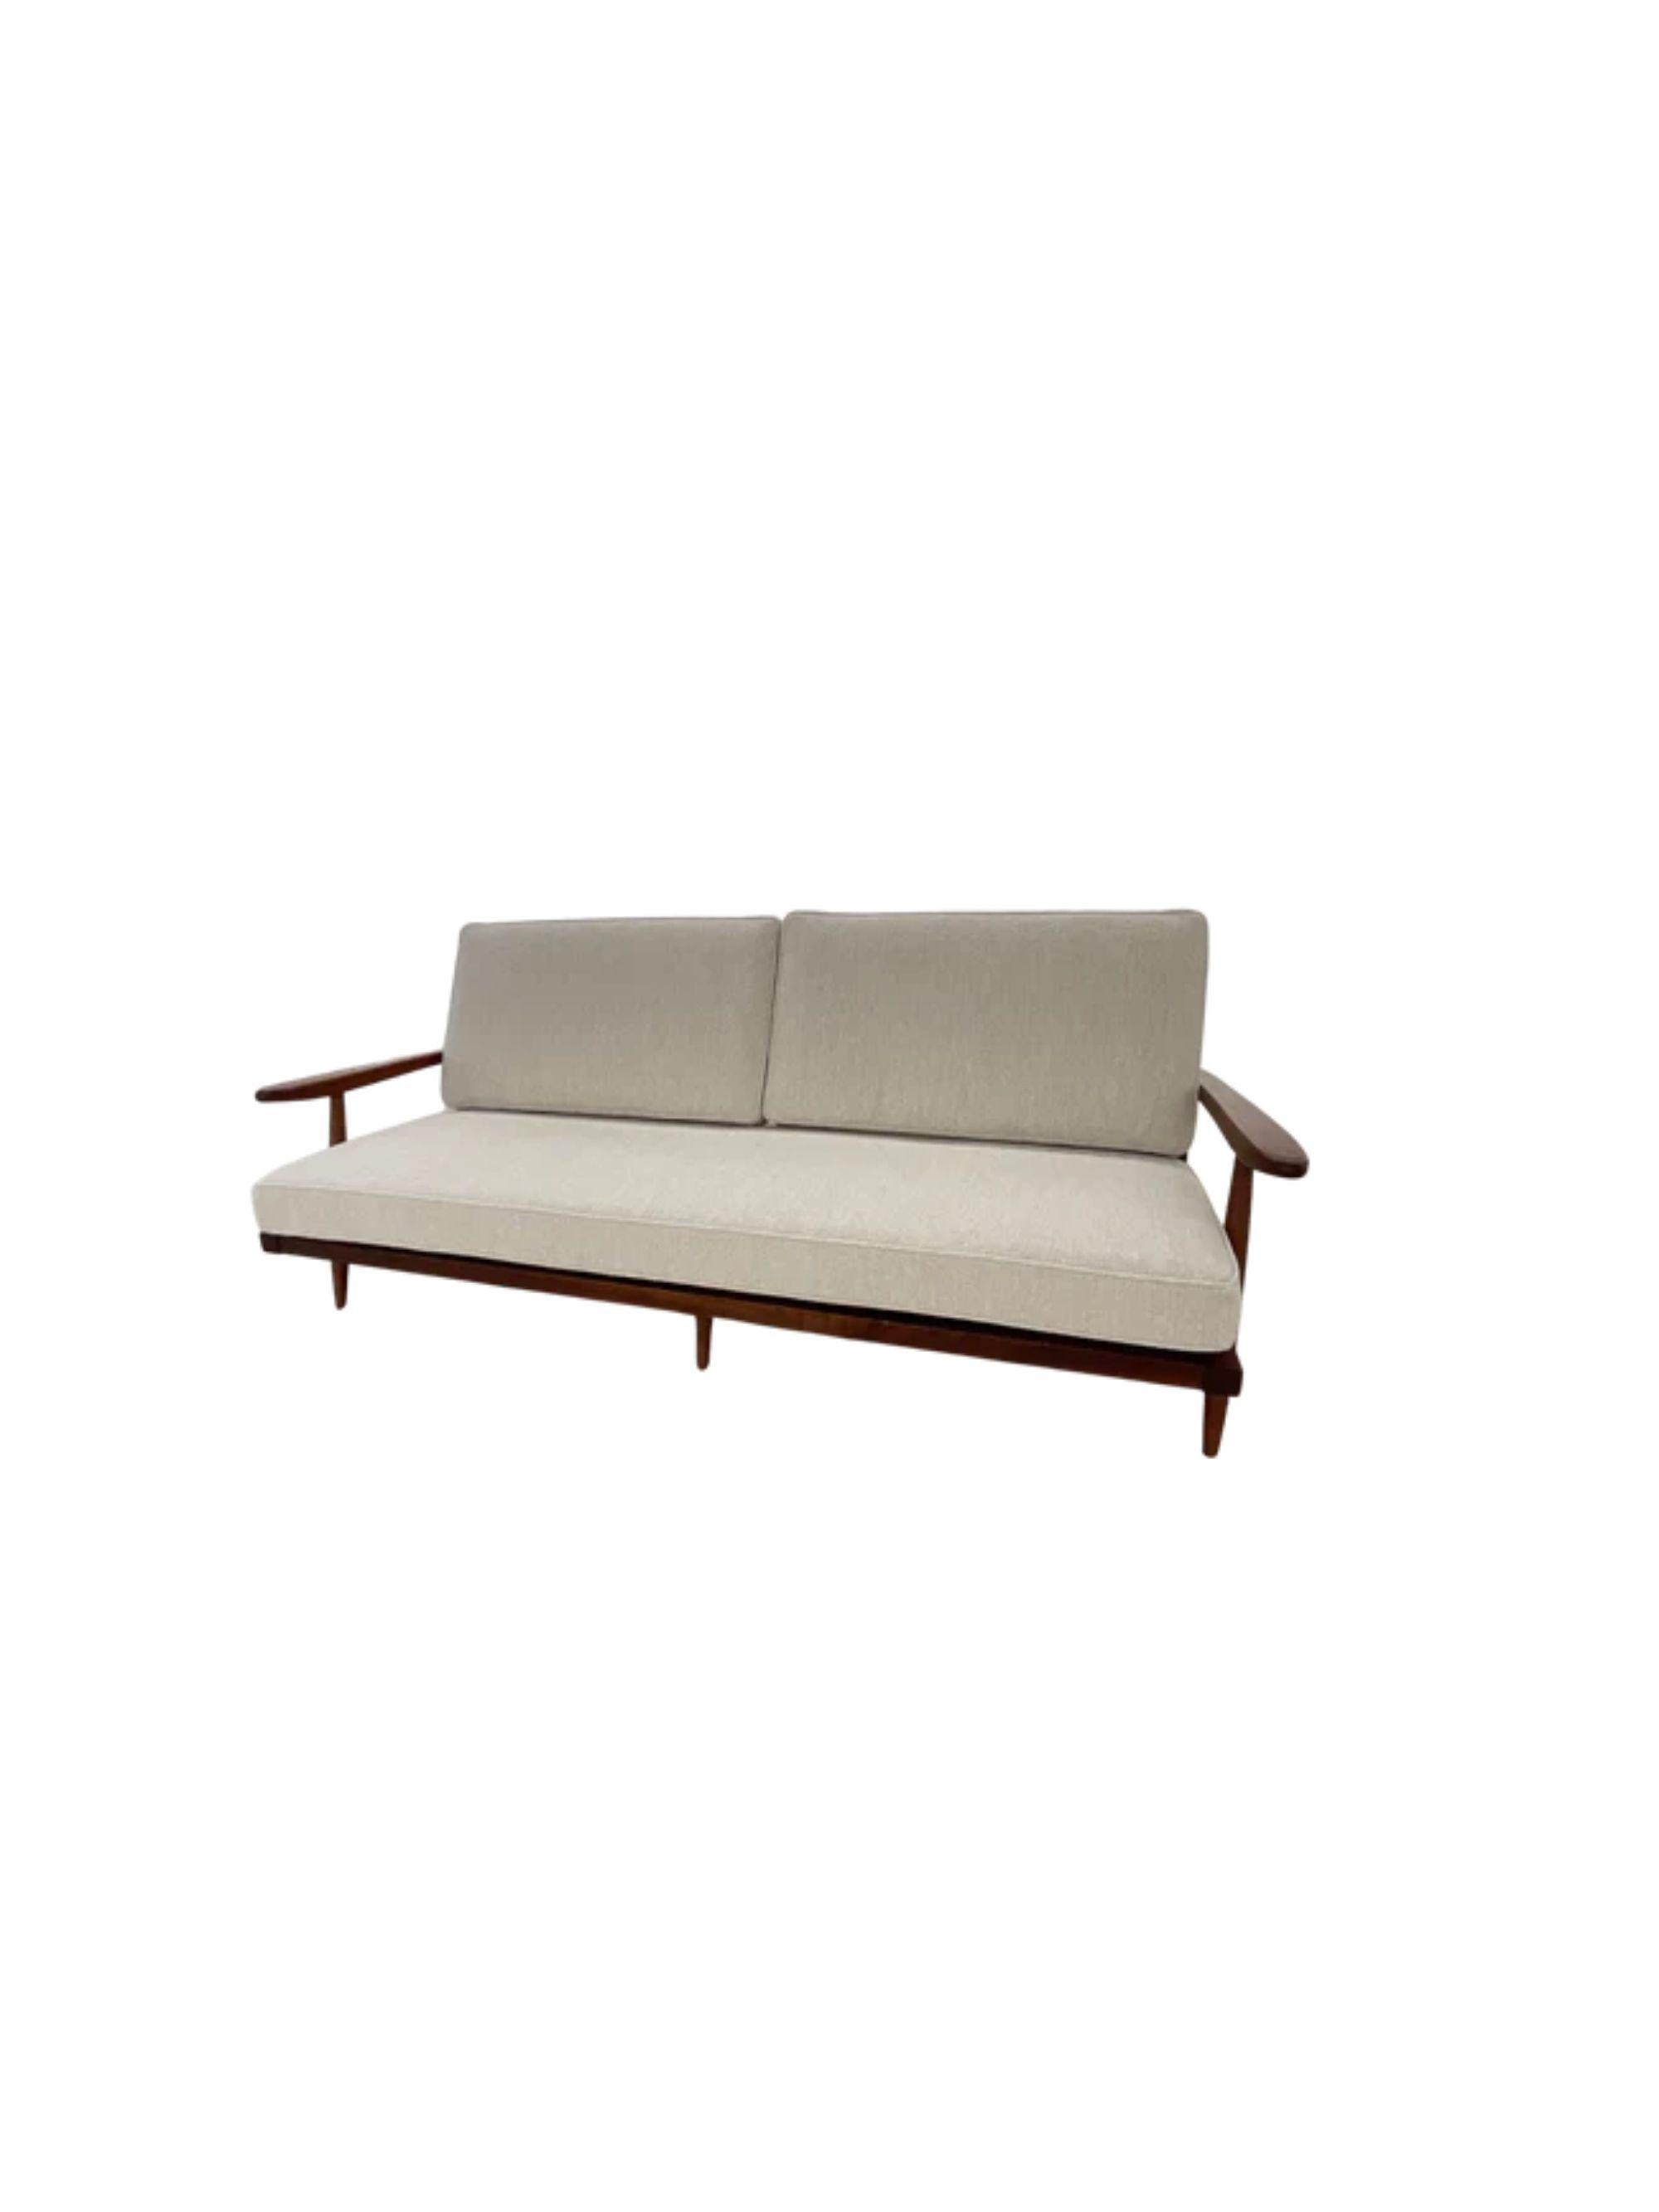 George Nakashima “Cushion” three seat walnut sofa with arms, USA, 1961

The sofa frame is in exceptional original condition free of repairs. The upholstery is very nice high quality boucle with high density foam making the sofa very